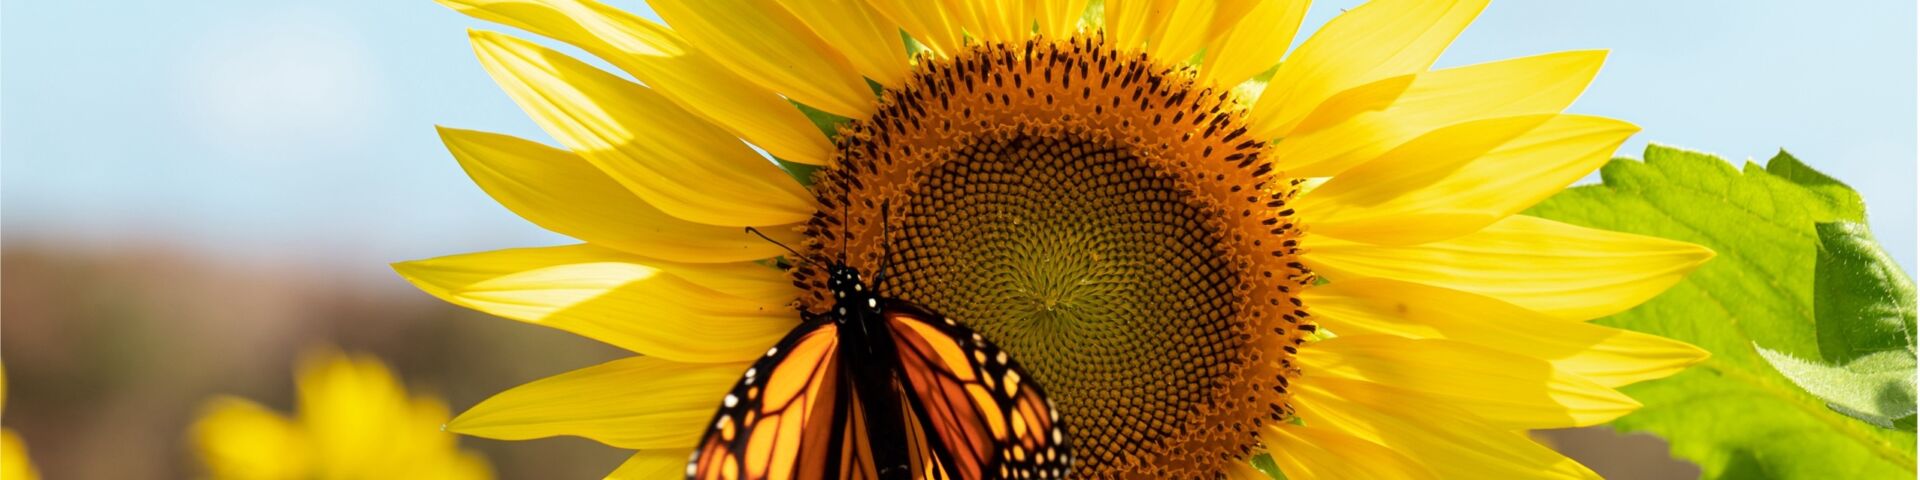 Photograph of a monarch butterfly on a sunflower against a blue sky background